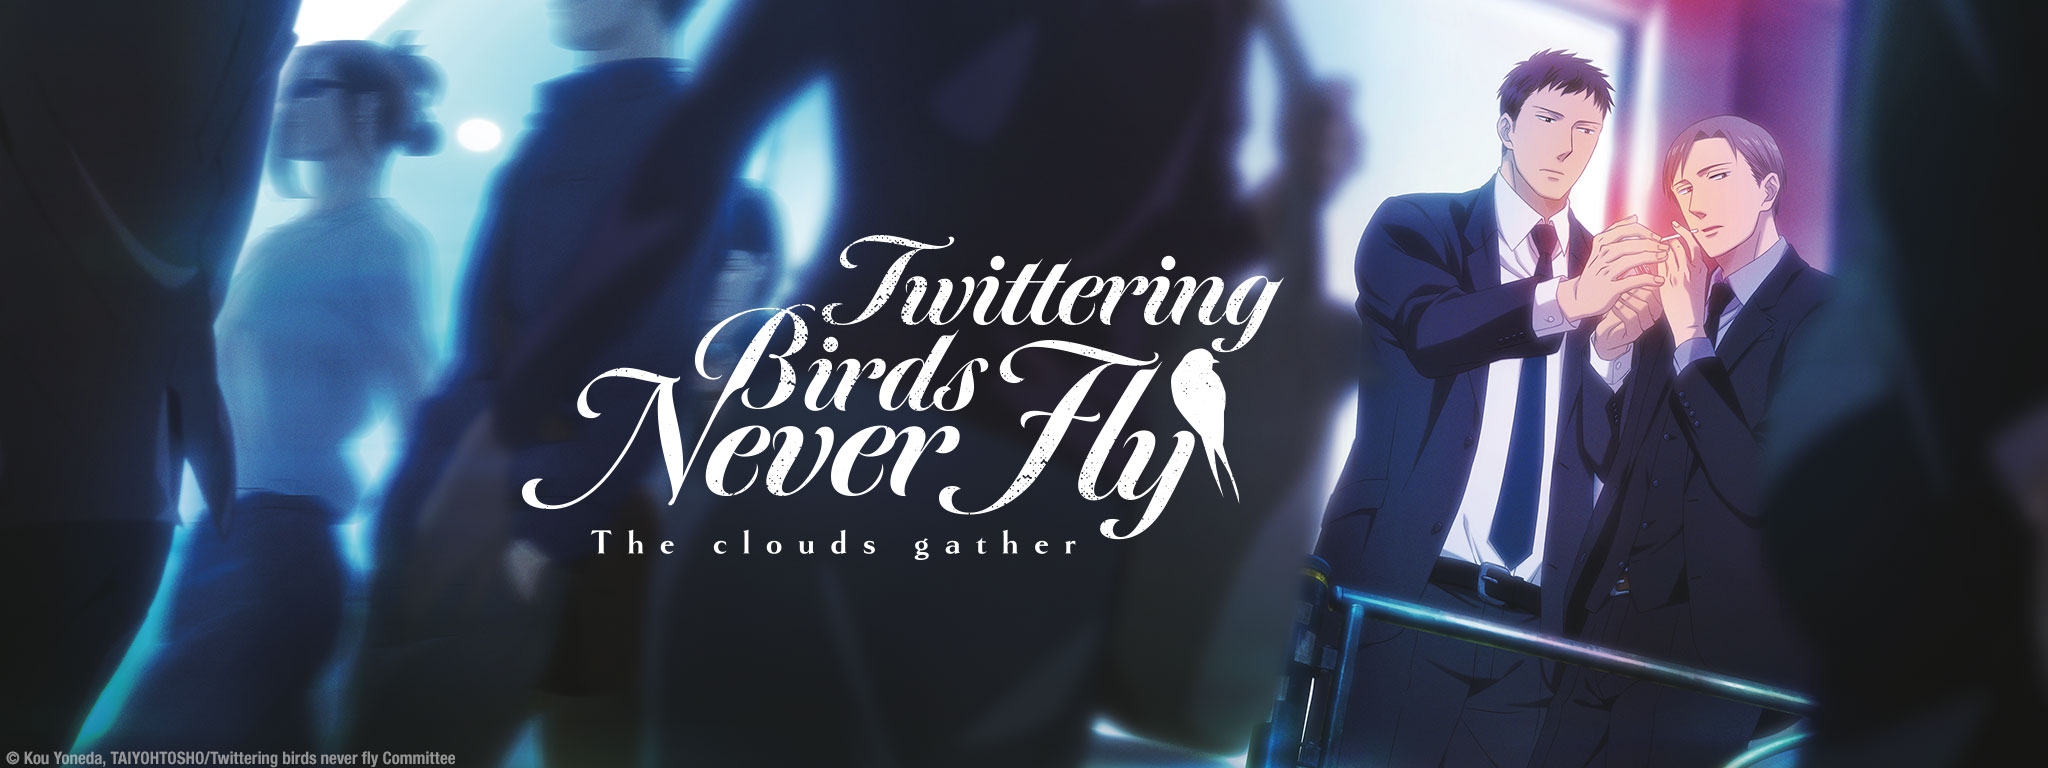 Title Art for Twittering birds never fly ~ The clouds gather ~